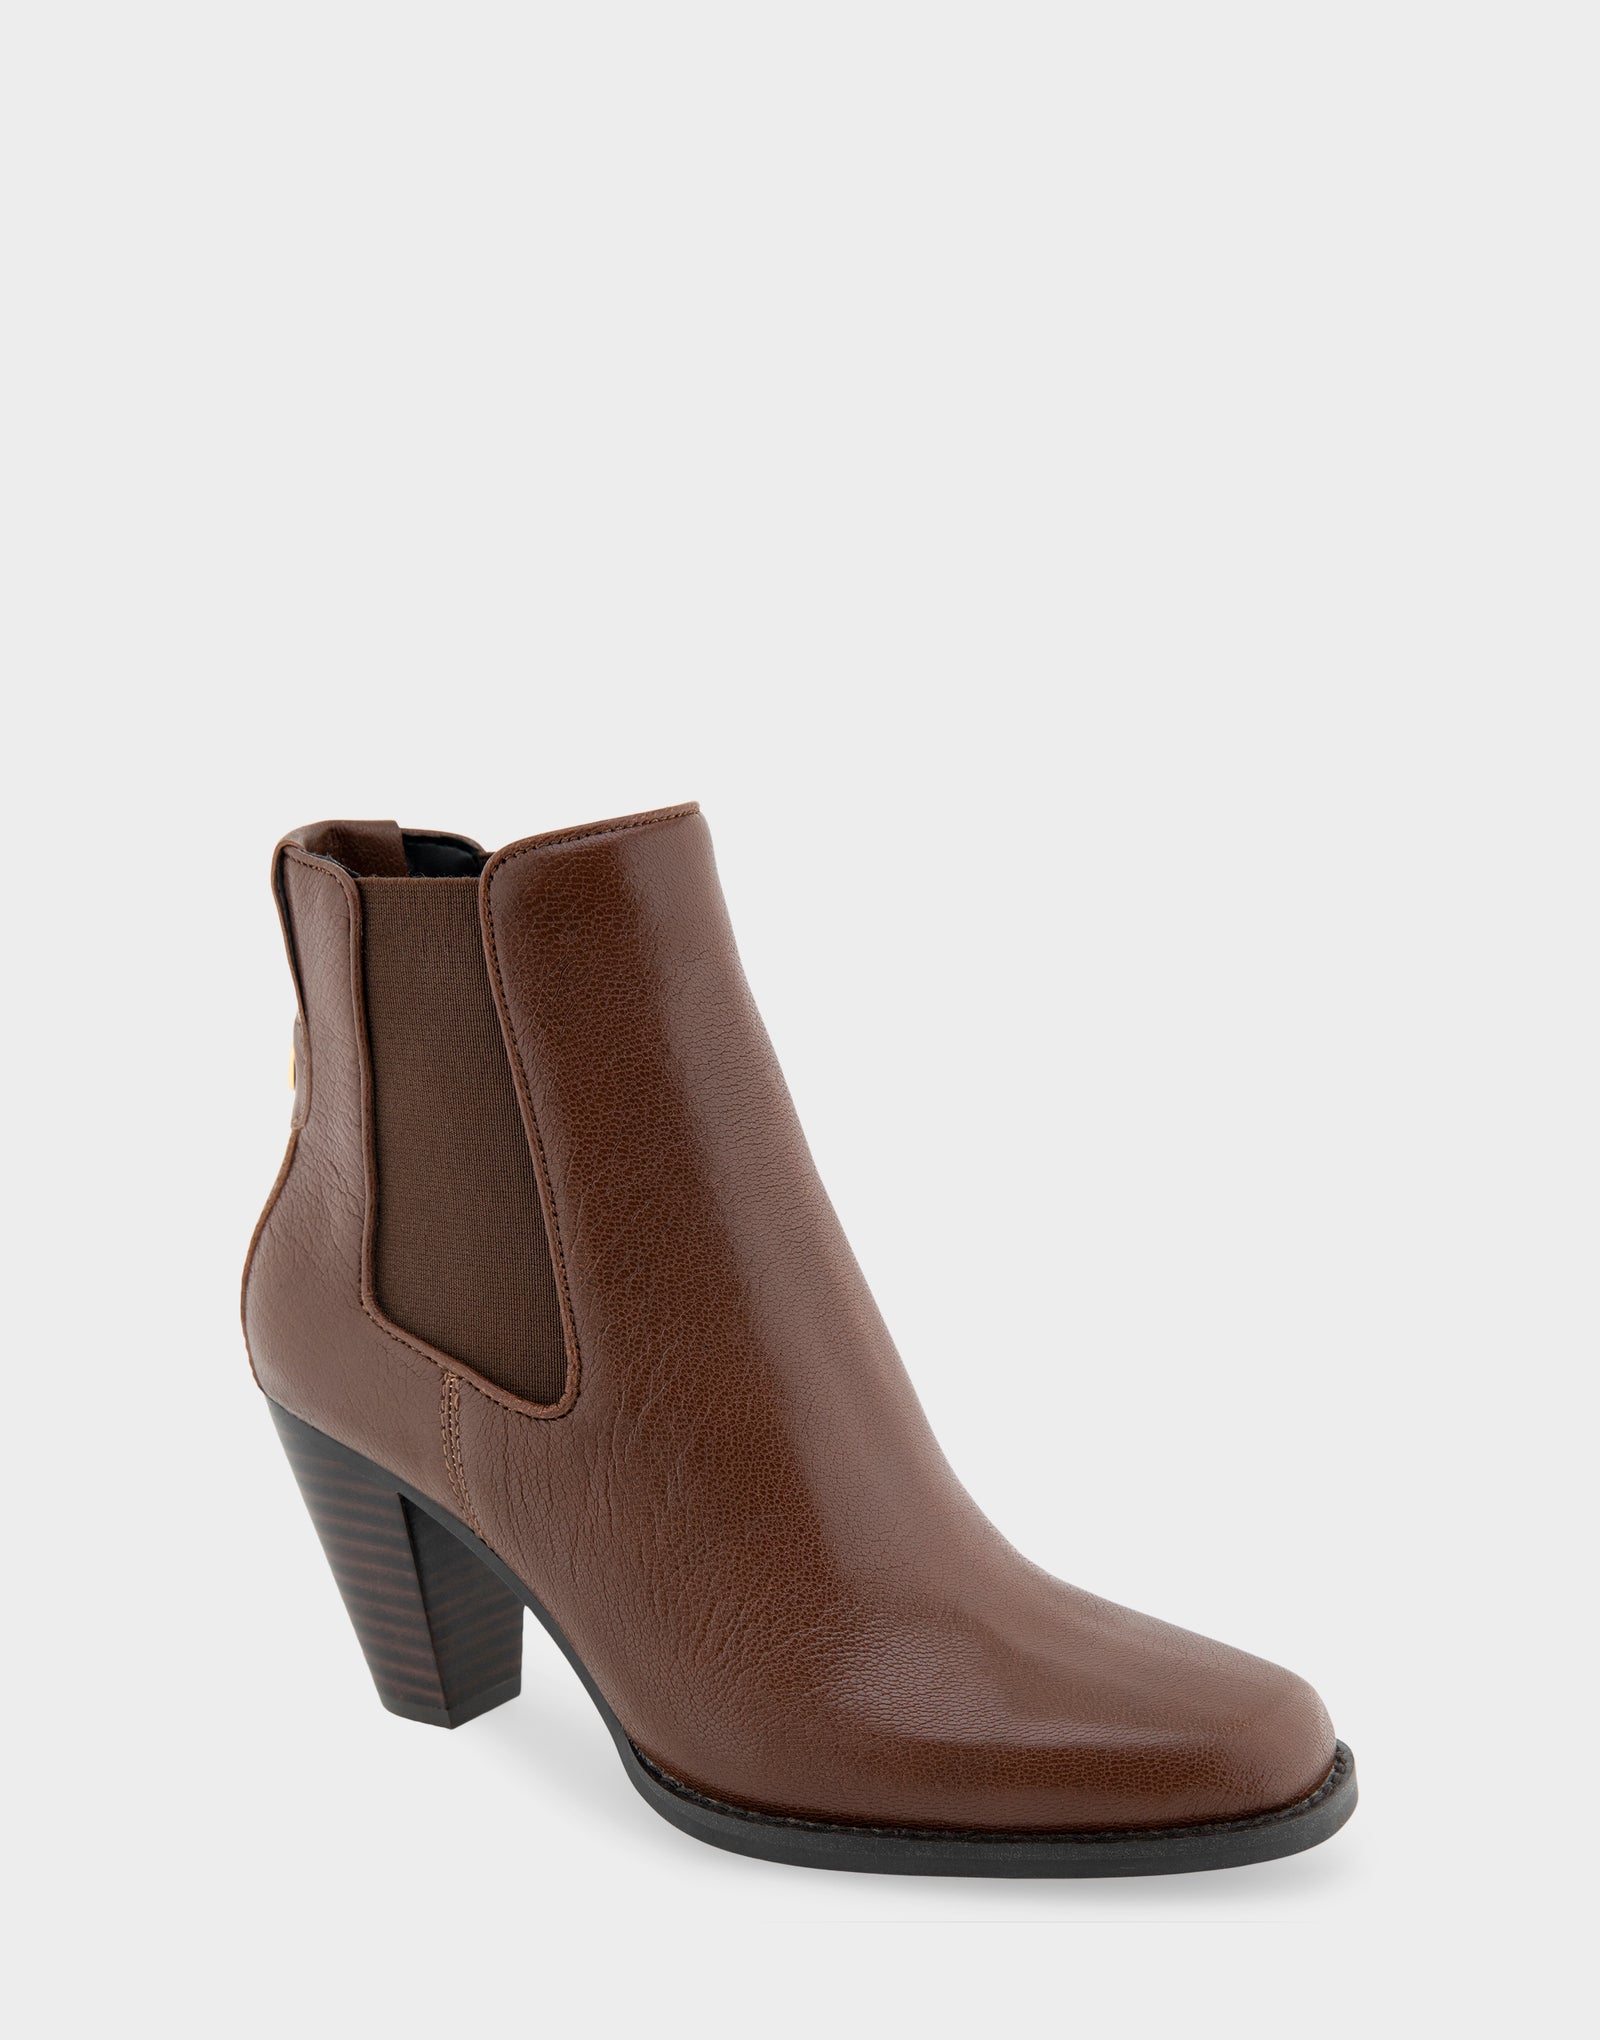 TOTEME + NET SUSTAIN The Mid Heel leather ankle boots | NET-A-PORTER